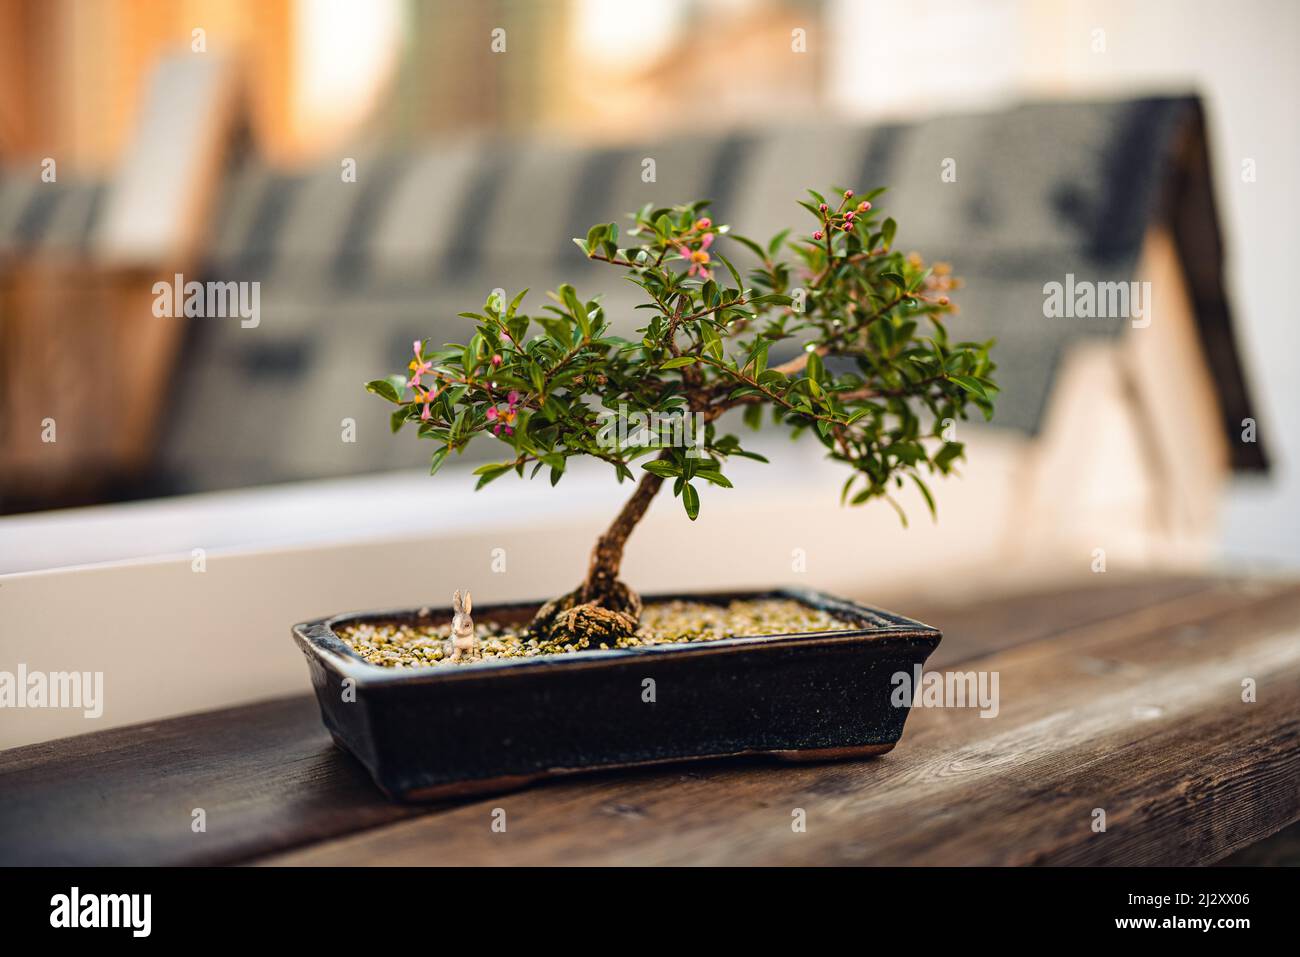 Flowering Bonsai with rabbit on rooftop Stock Photo